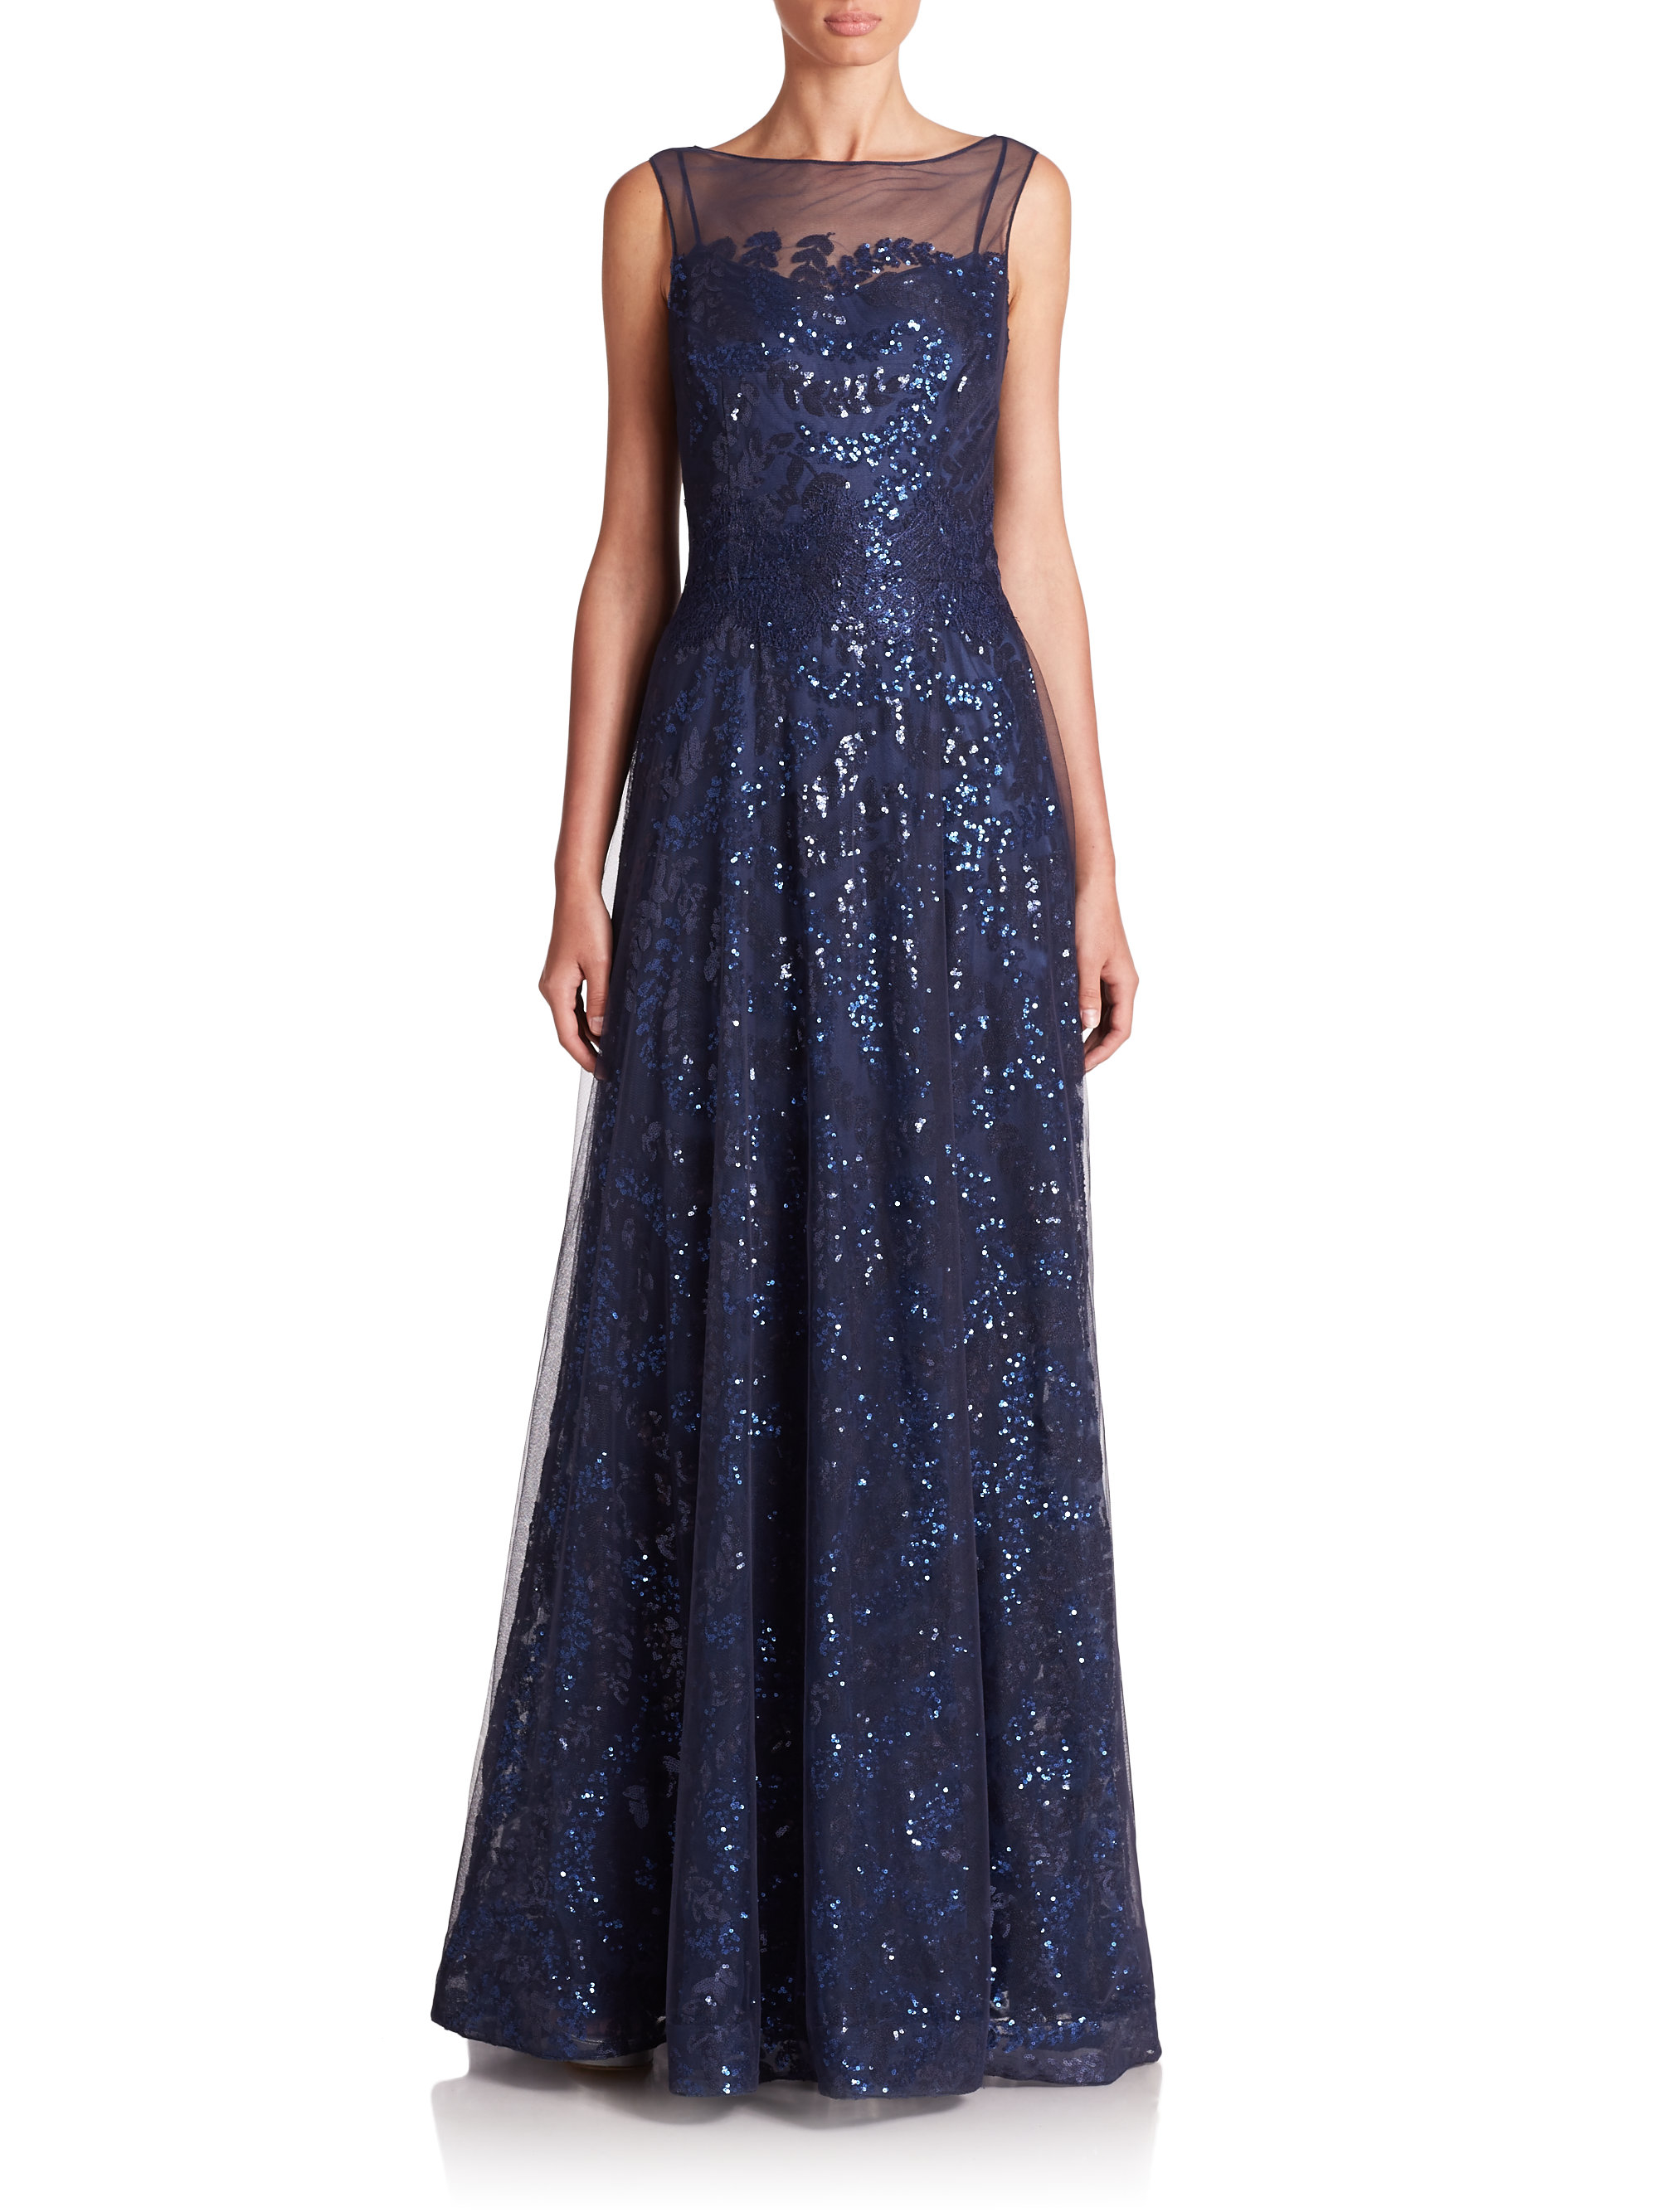 Teri Jon Sequined Illusion Gown in Blue - Lyst